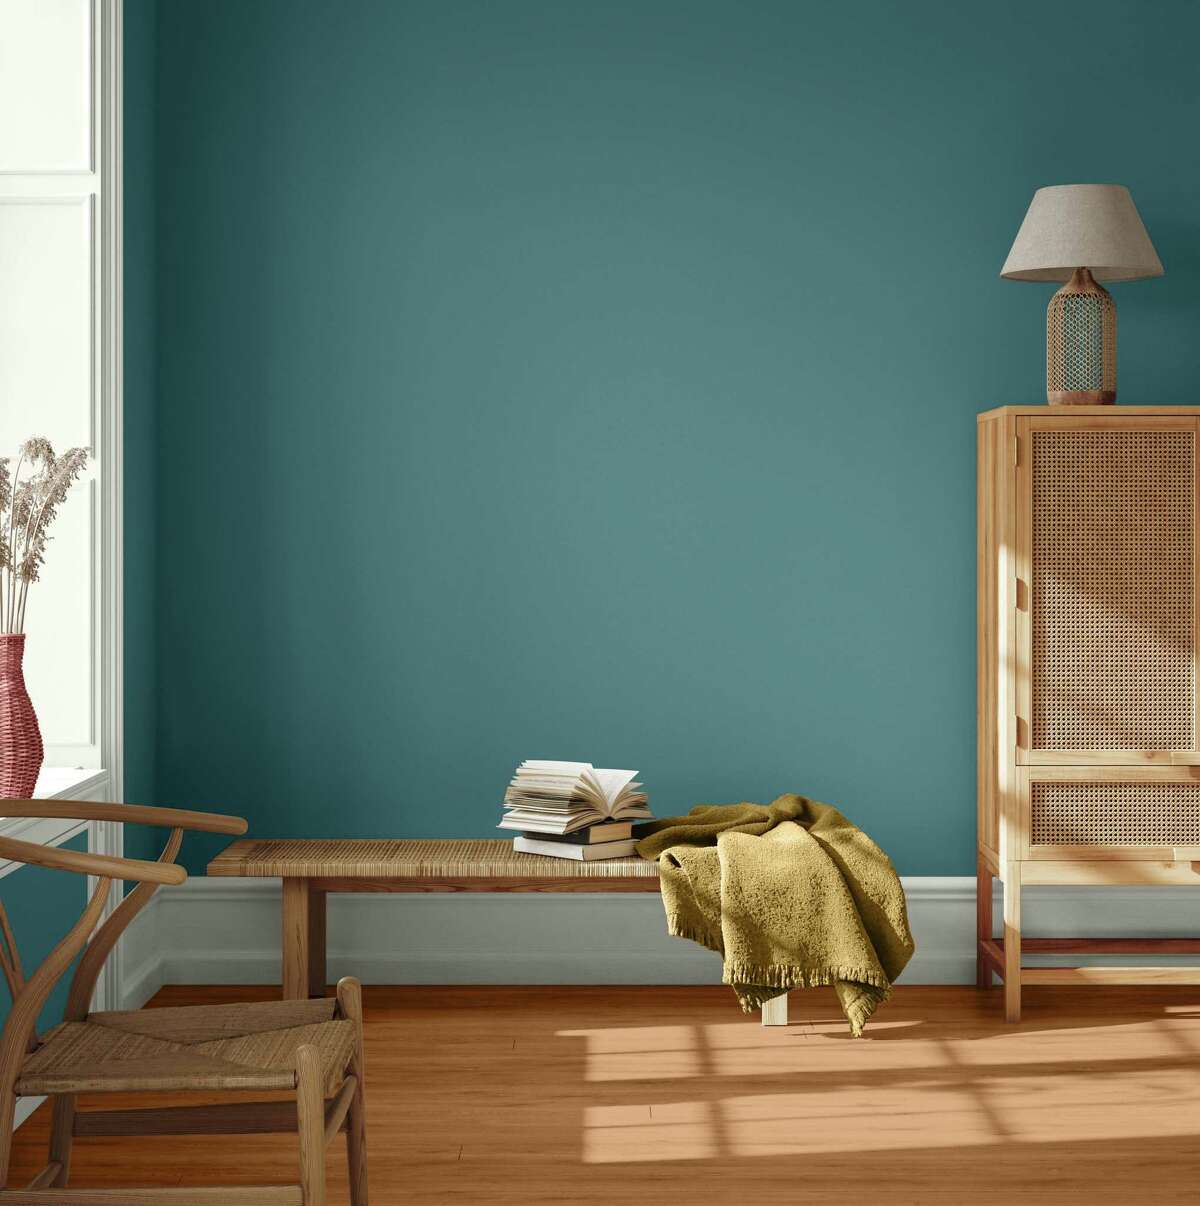 Glidden by PPG has named Vining Ivy as its 2023 Color of the Year.